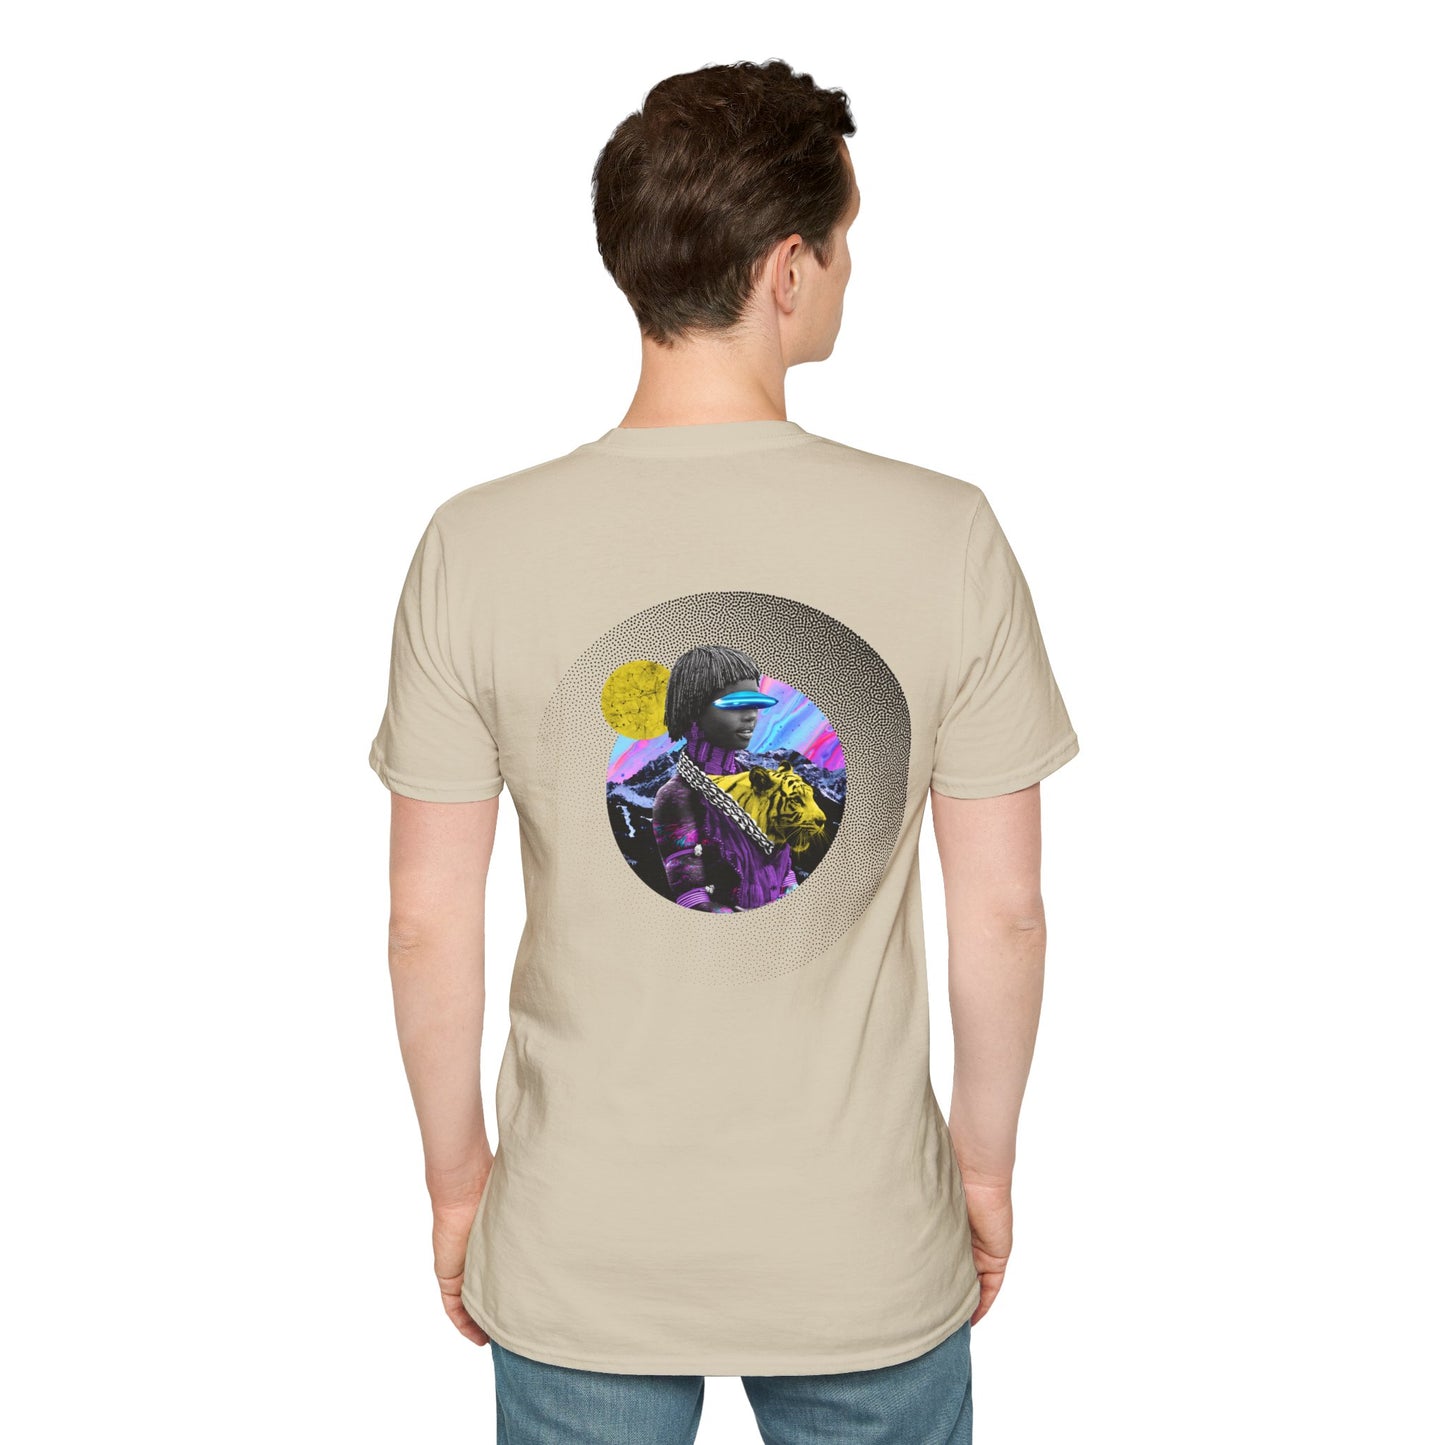 Sand T-shirt with a collage of an African woman with futuristic glasses and a yellow tiger